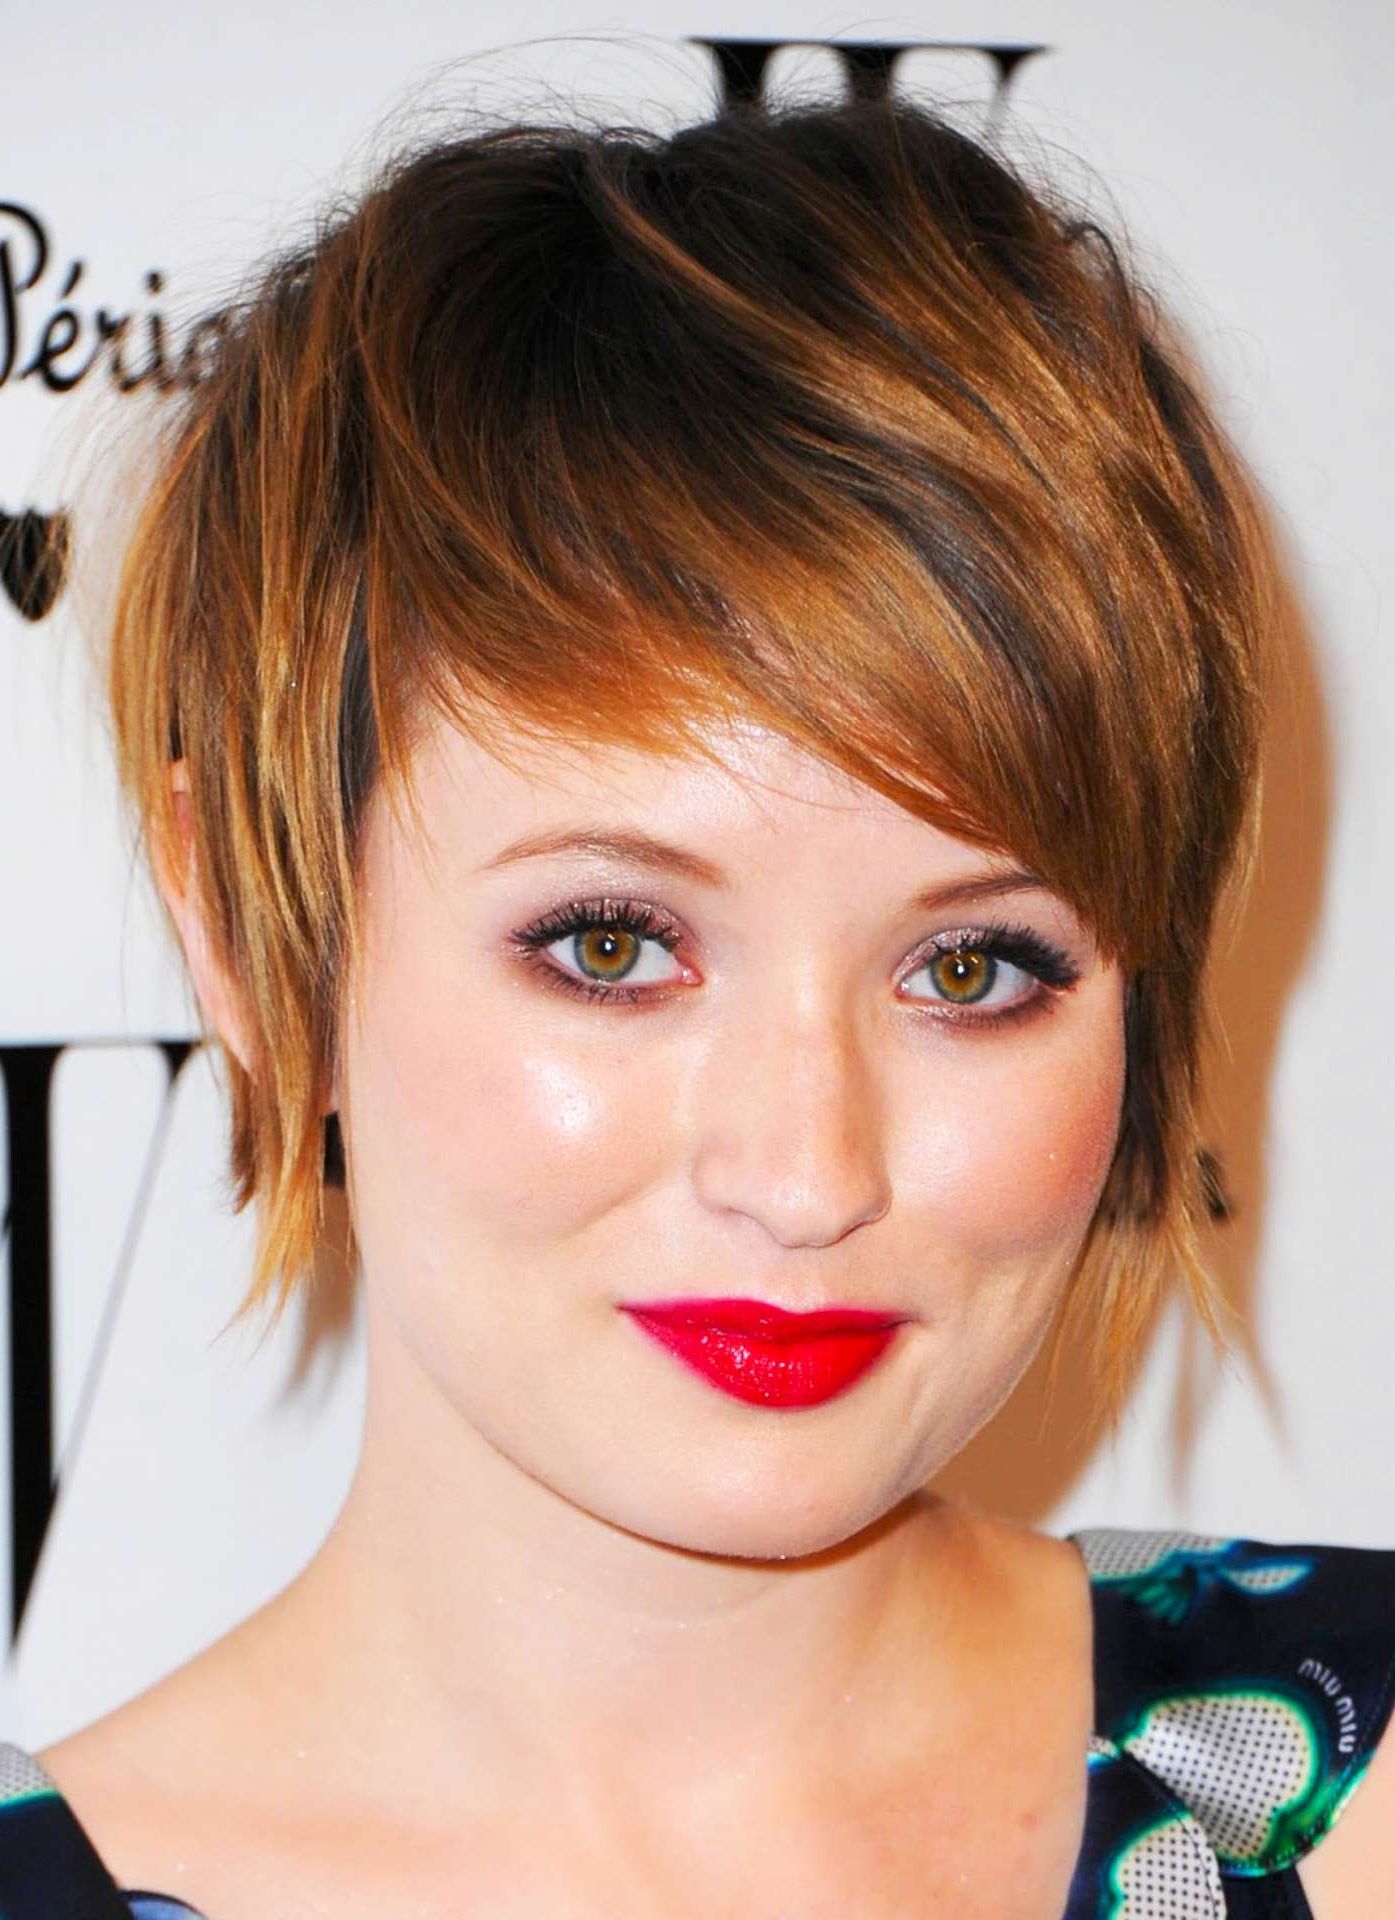 14 Best Short Haircuts For Women With Round Faces With Short Haircuts For Round Faces And Curly Hair (View 4 of 25)